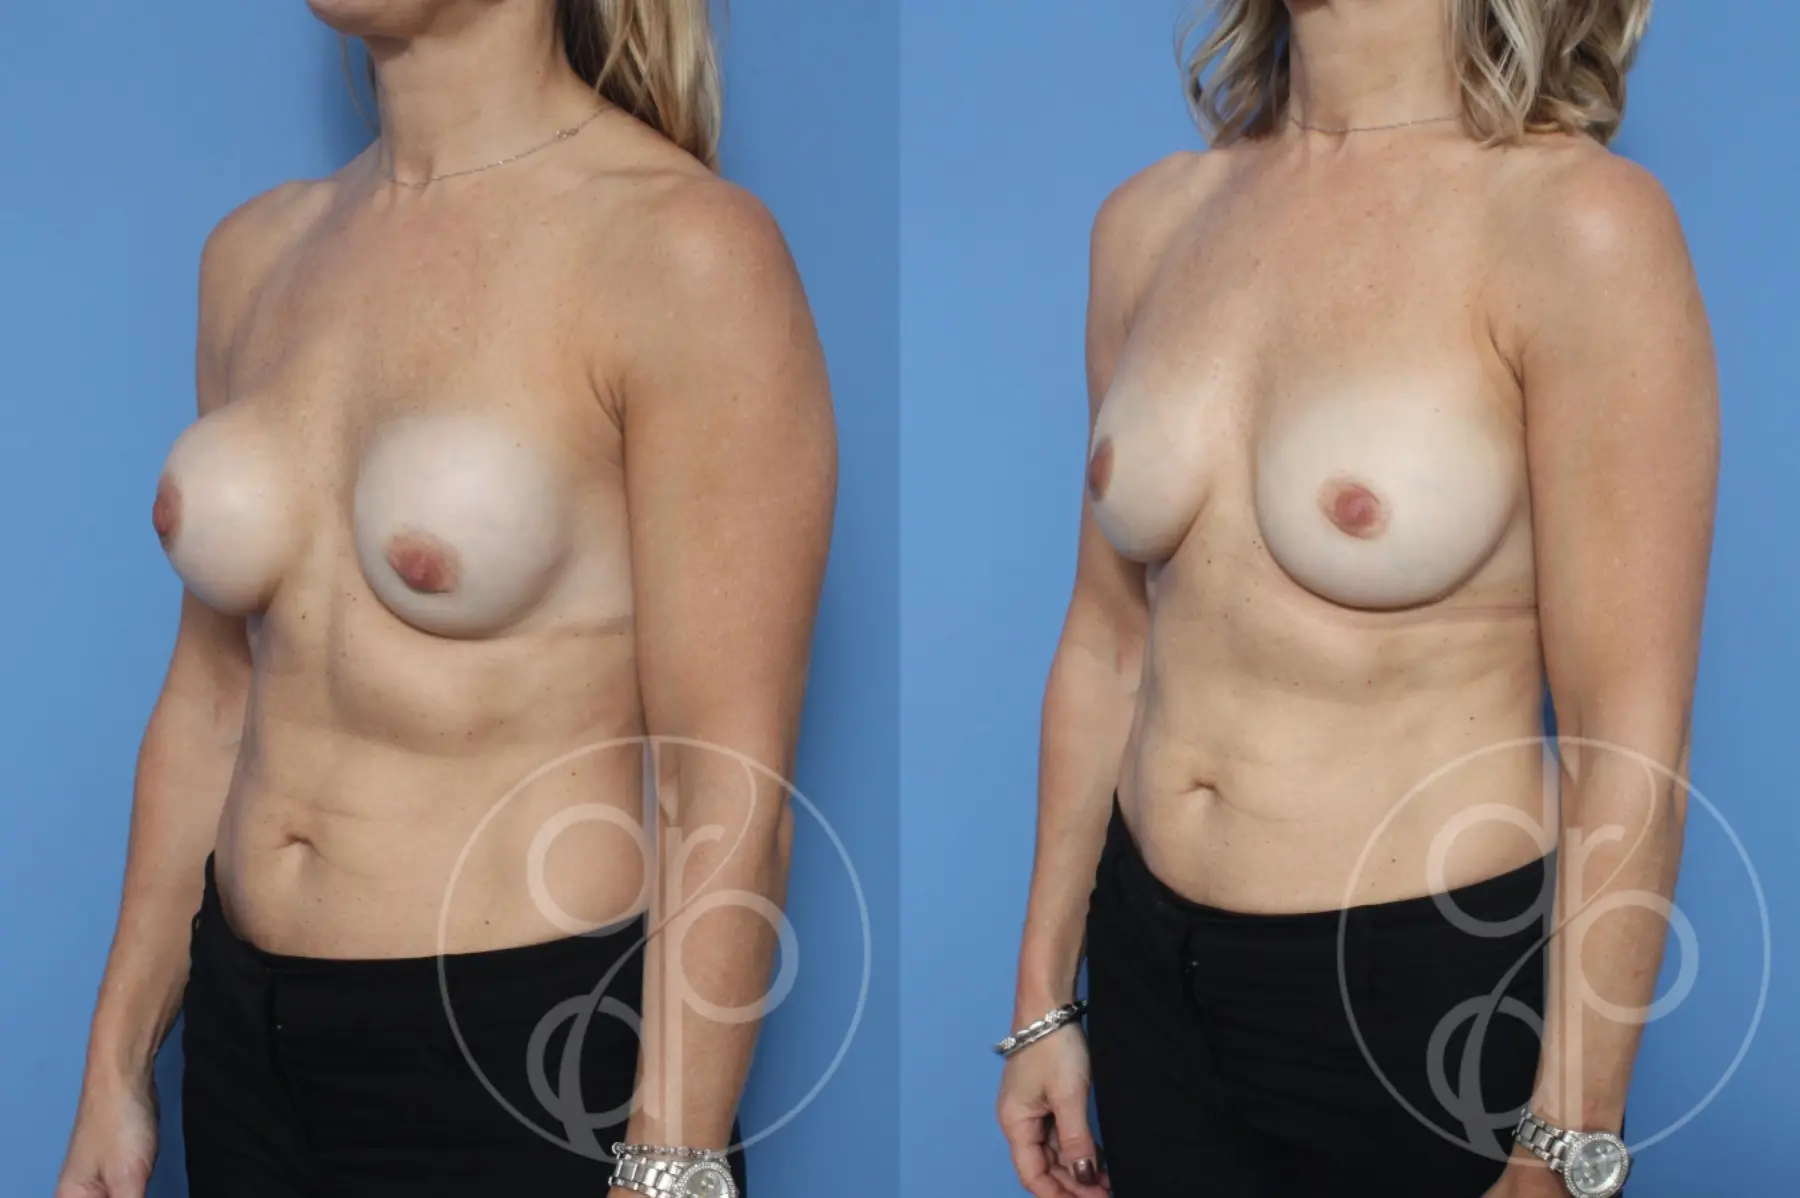 patient 10500 remove and replace breast implants before and after result - Before and After 3